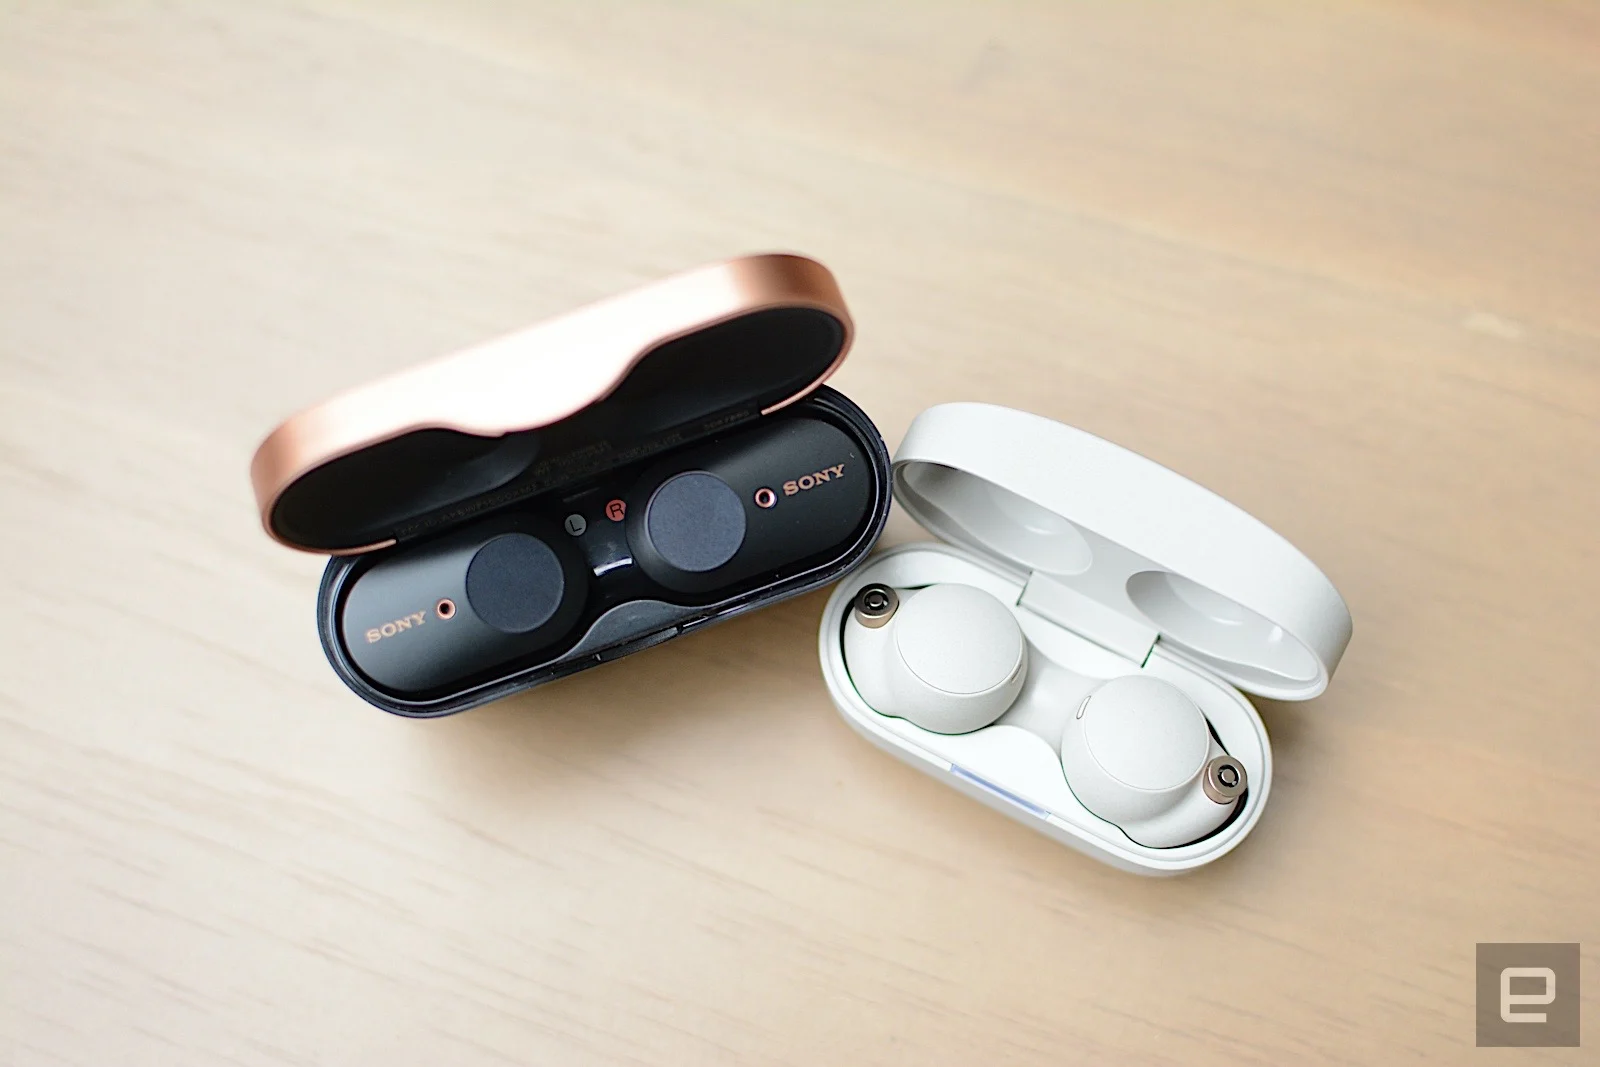 Sony WF-1000XM4 review: Excellent earbuds, awkward fit | Engadget